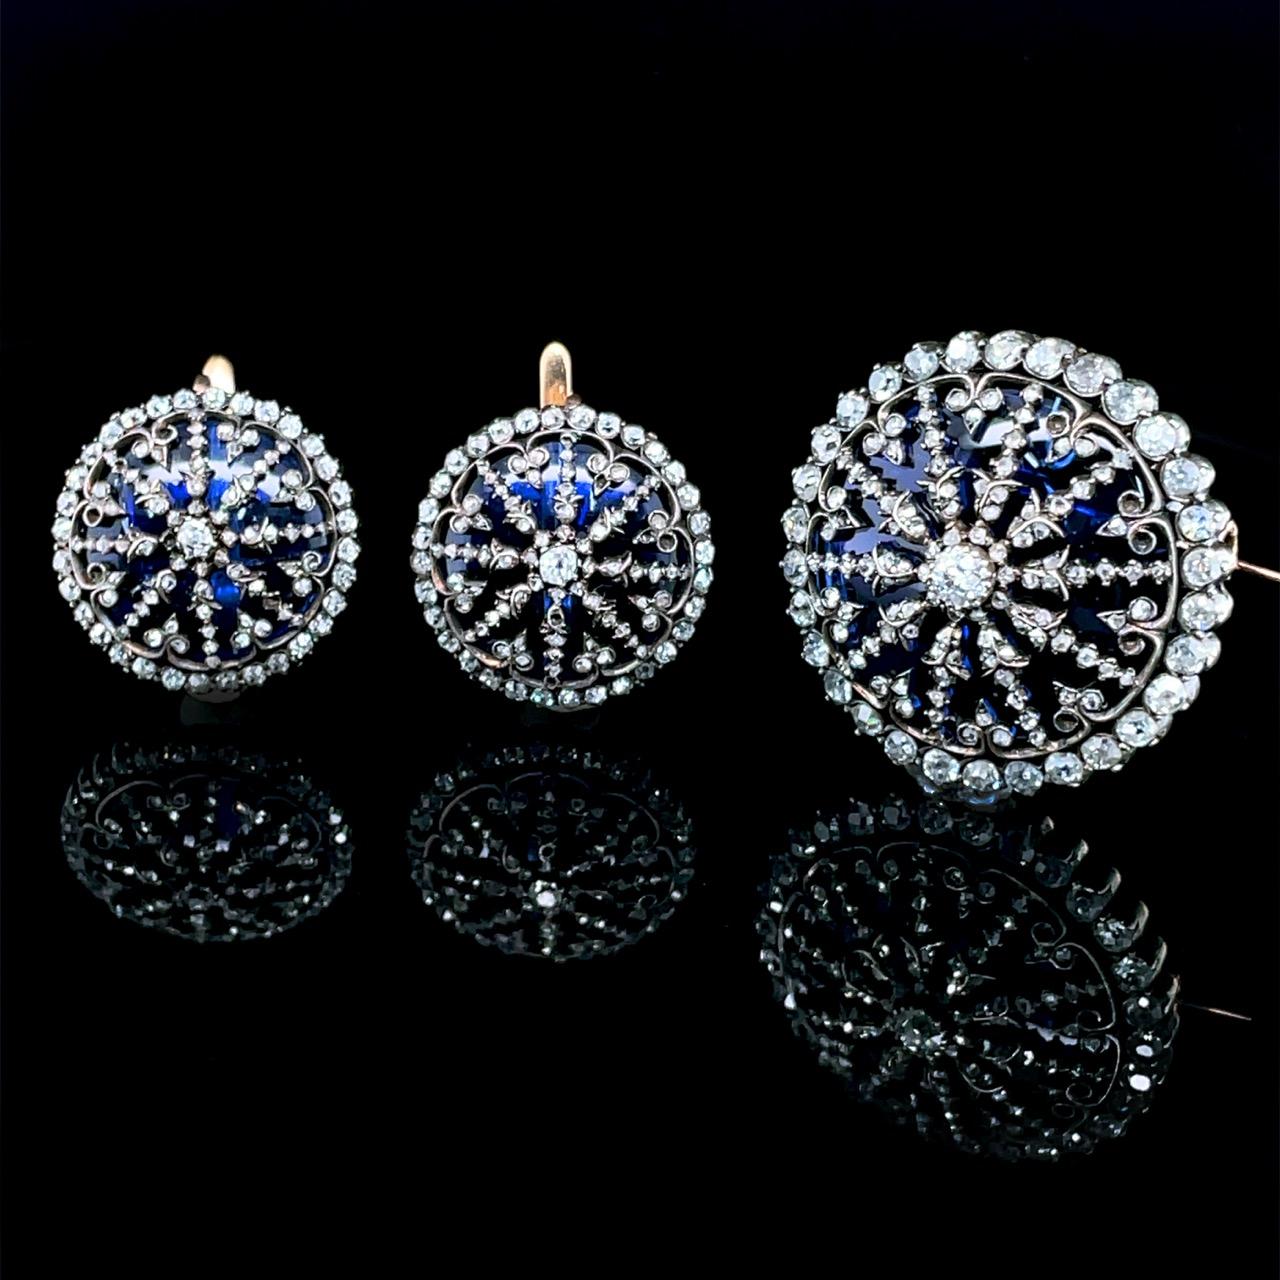 Victorian Diamond and Glas Earrings and Brooch/Pendant Demi Parure, ca. 1880s

A beautiful and very unusual diamond Victorian demi-parure consisting of a pair of earrings and a brooch/pendant. The circular shaped jewels are based on blue-tinted